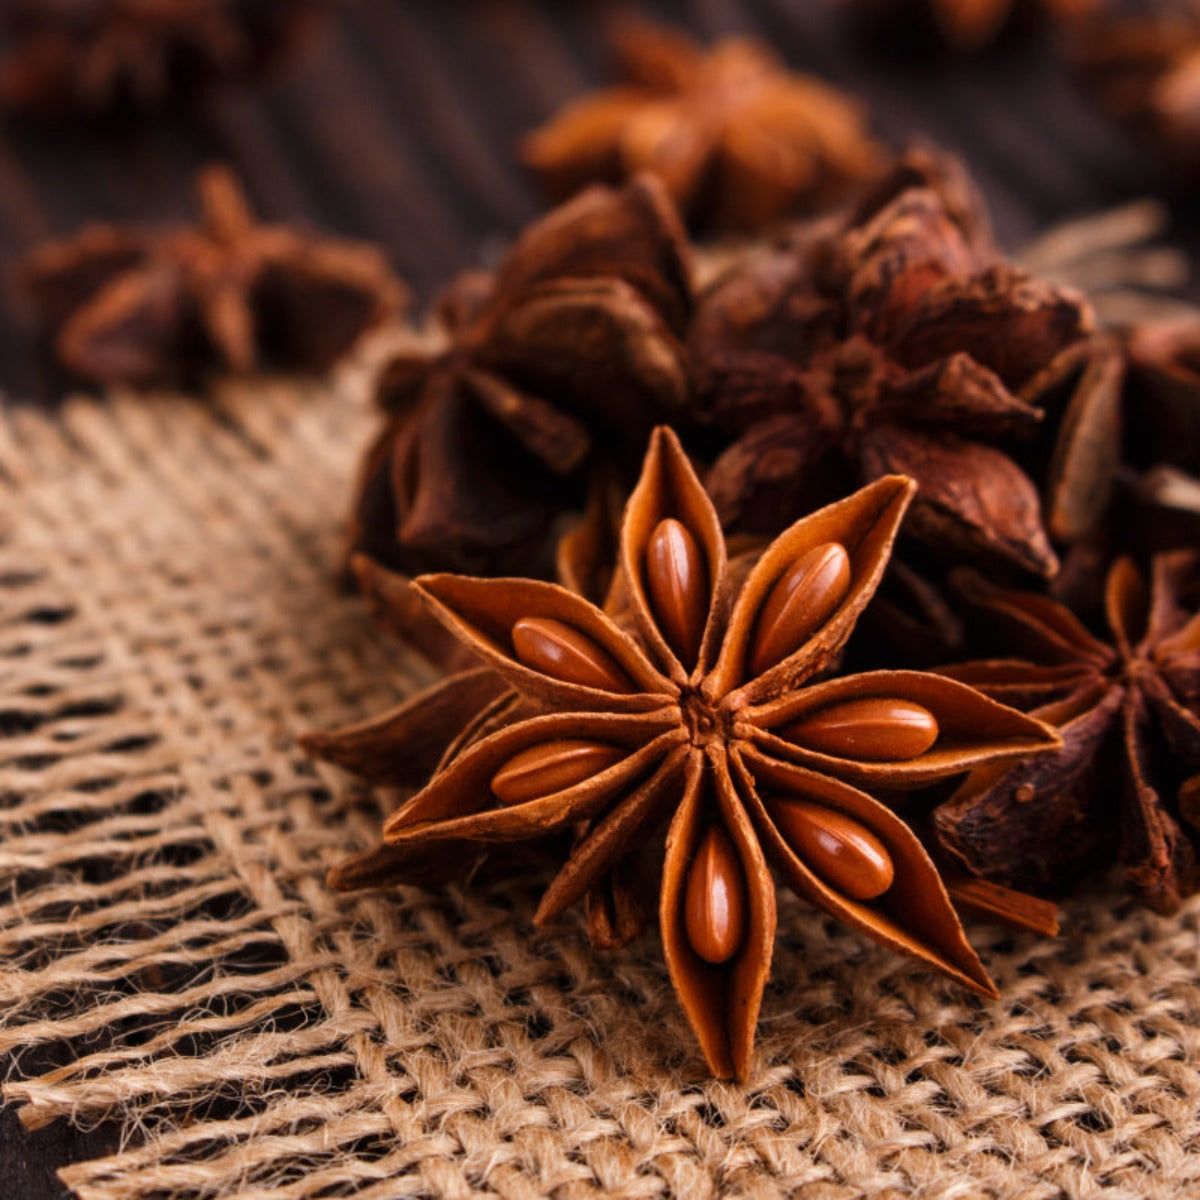 Star anise representing the spice notes in Açaí Flower Perfume